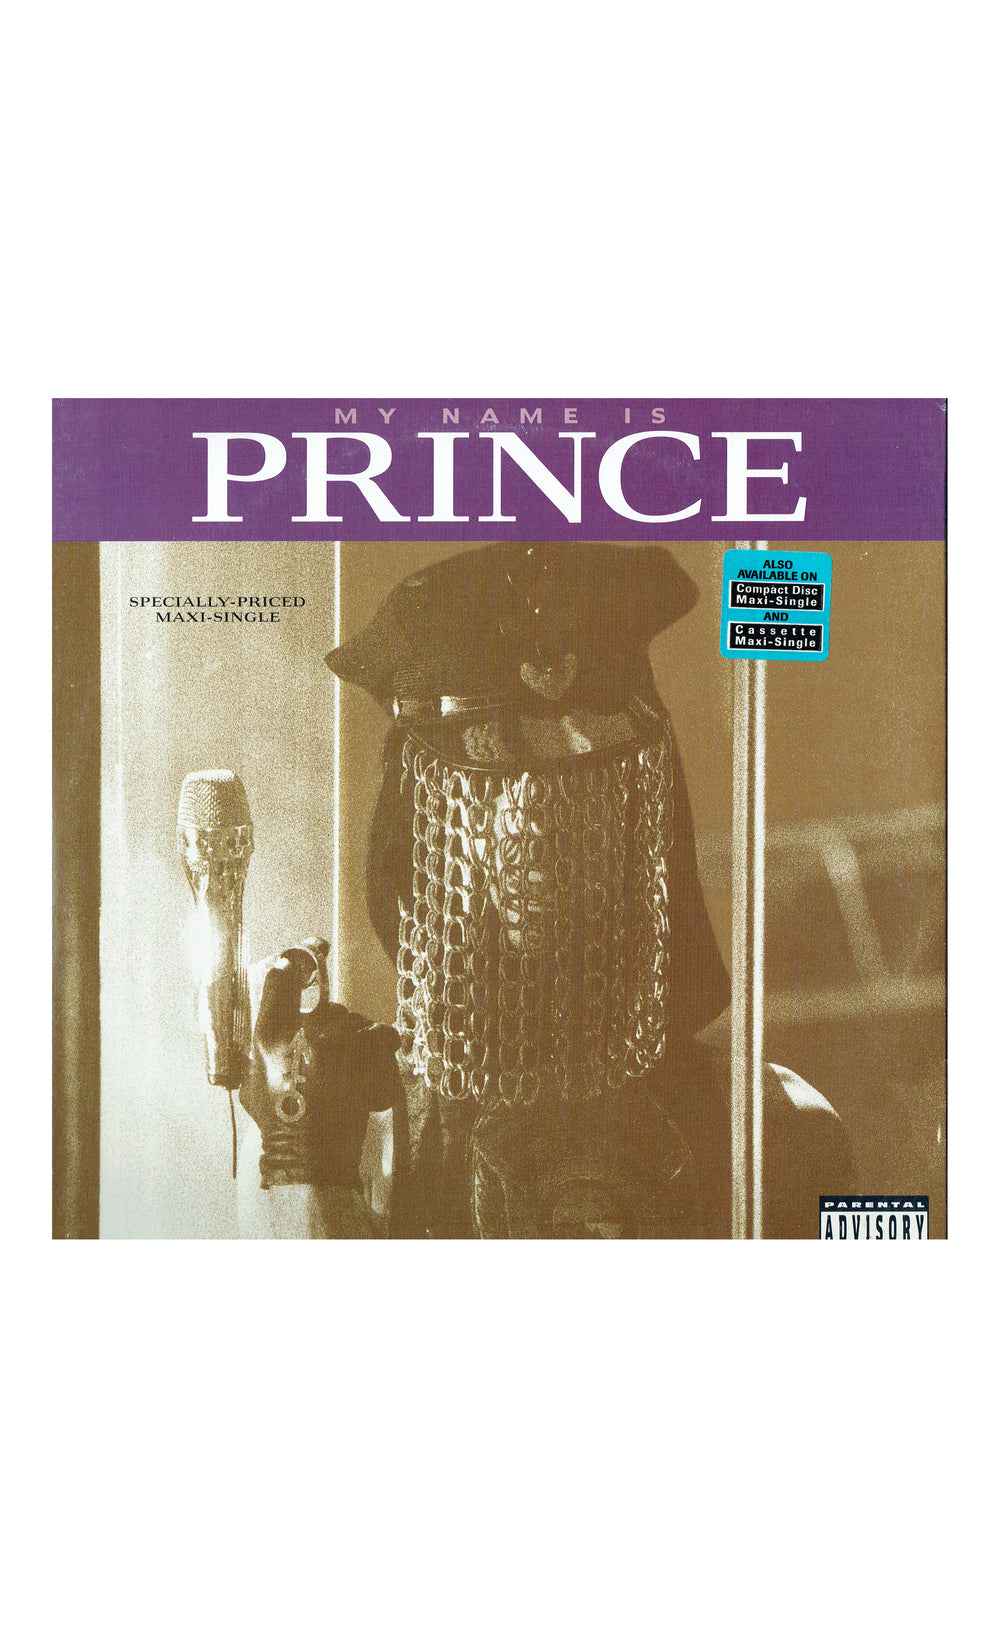 Prince – & The New Power Generation – My Name Is Prince Vinyl 12" Maxi Single US Preloved: 1992